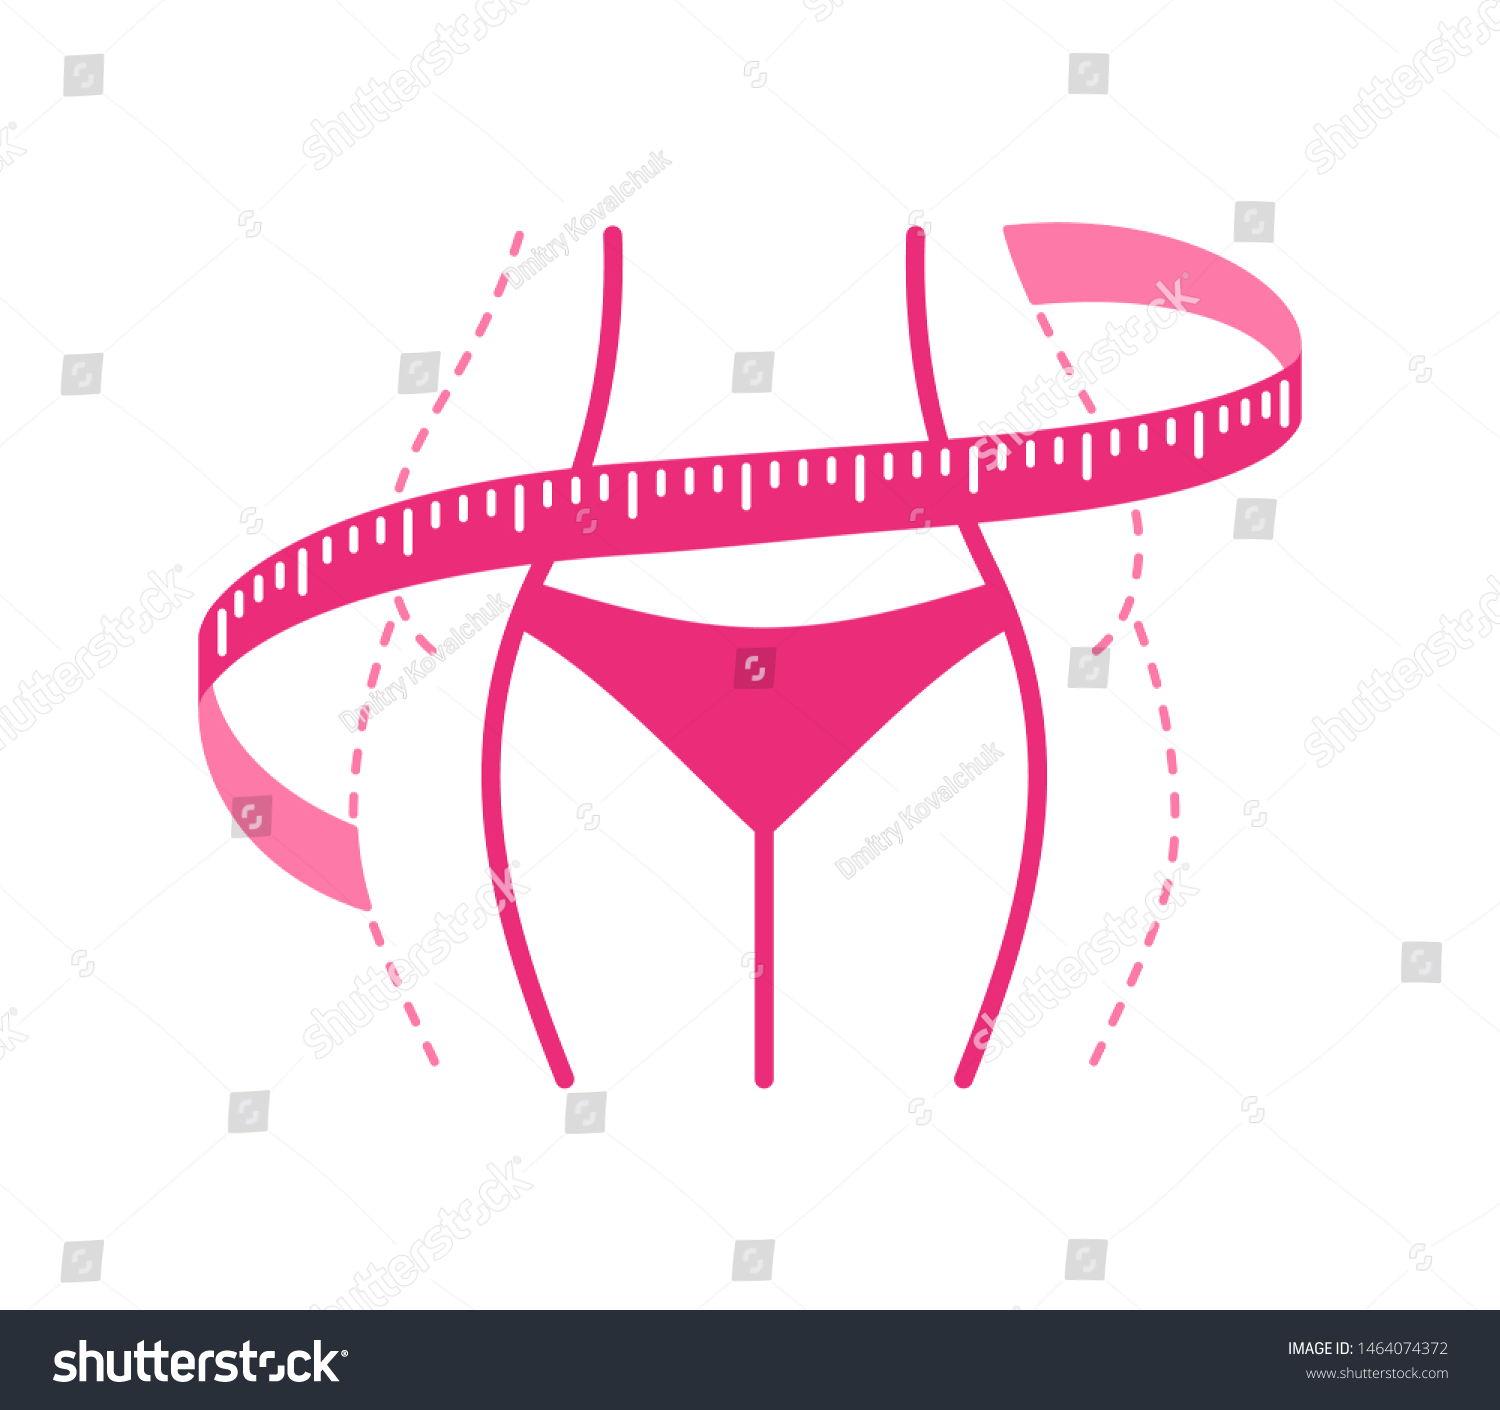 SVG of Losing weight icon or logo - fat woman  body in dashed line and slim figure in main color with tape measure entwined around - conceptual vector illustration svg